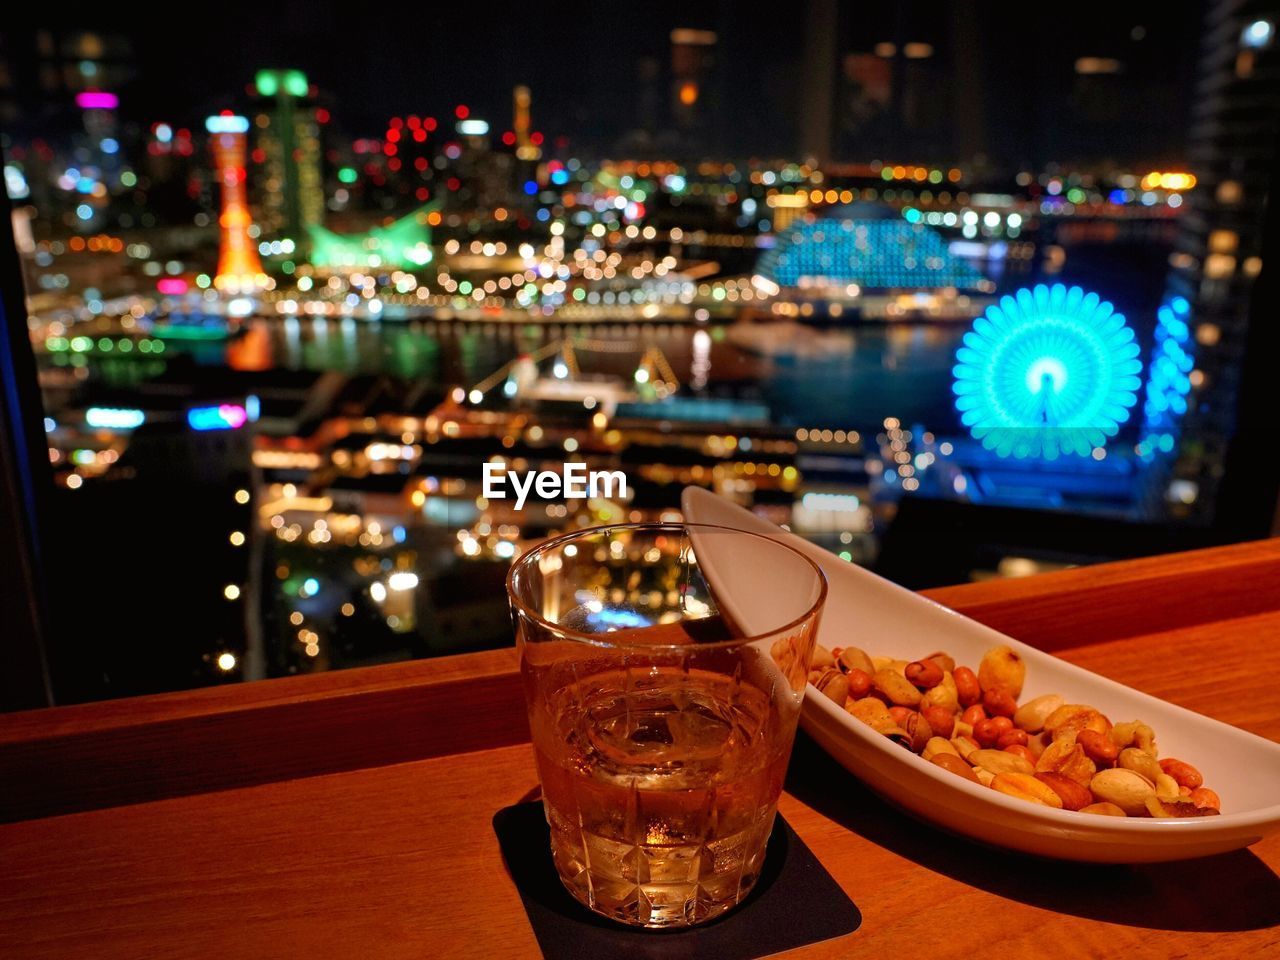 Close-up of food and drink on table with illuminated city in background at night